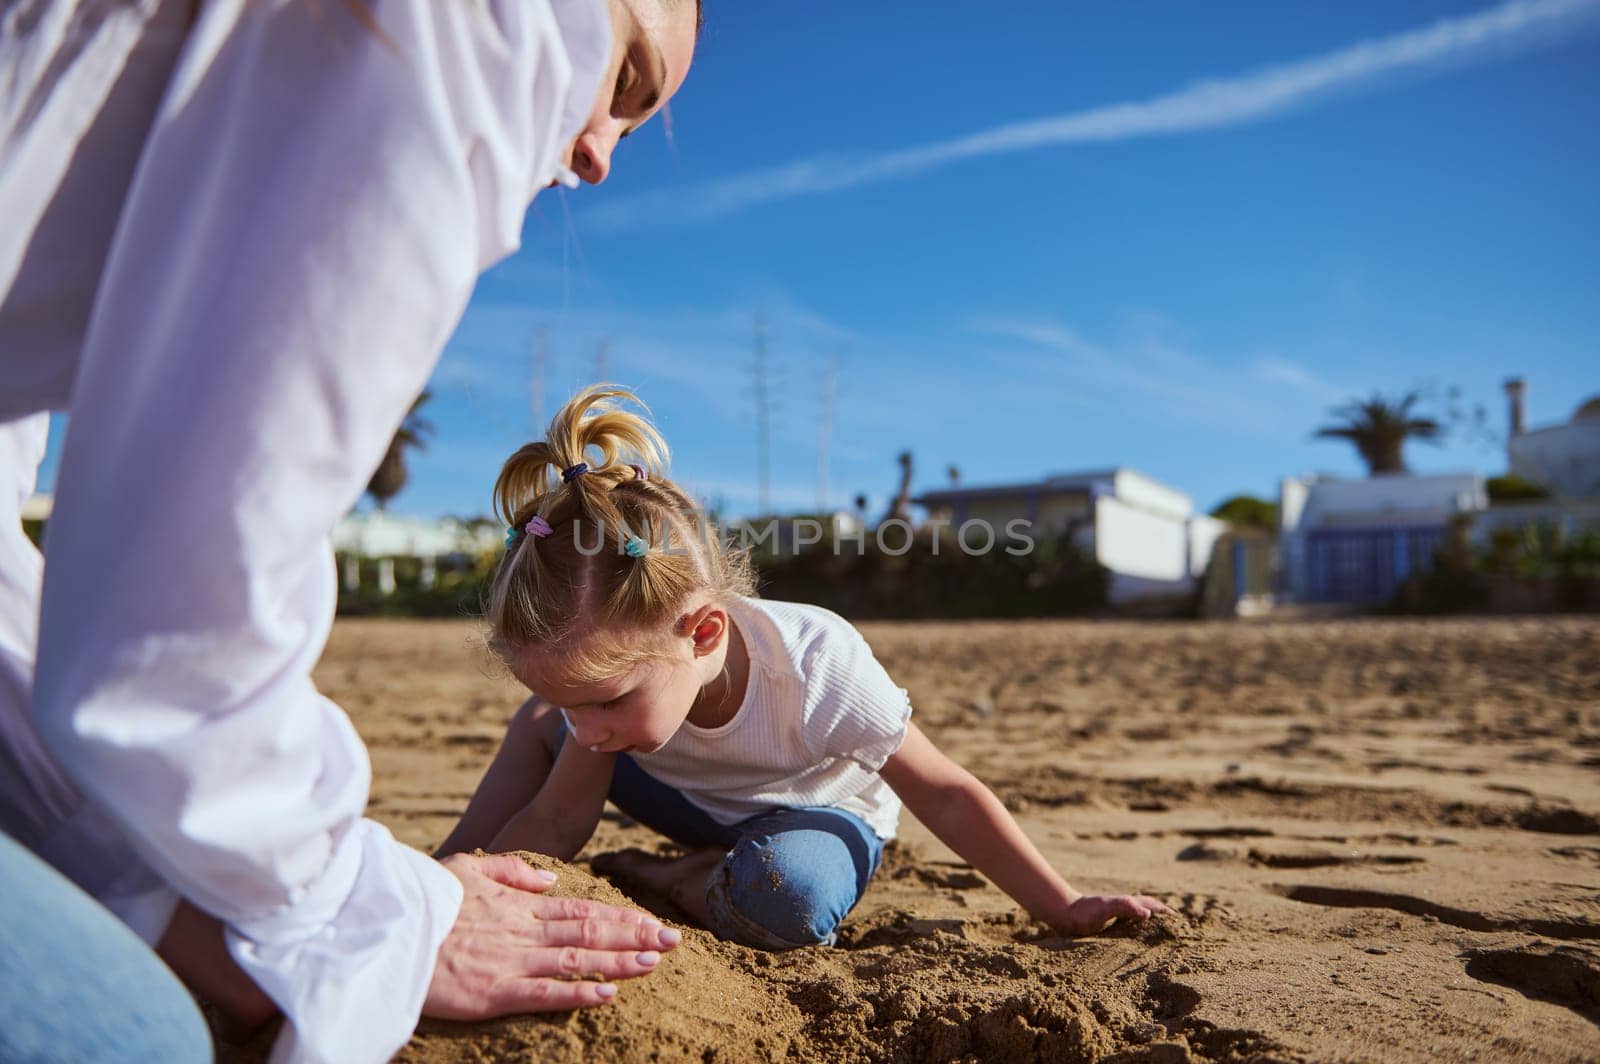 Mother and daughter playing on the beach together, building sand figures on the beach on warm sunny day. Happy family relationships concept